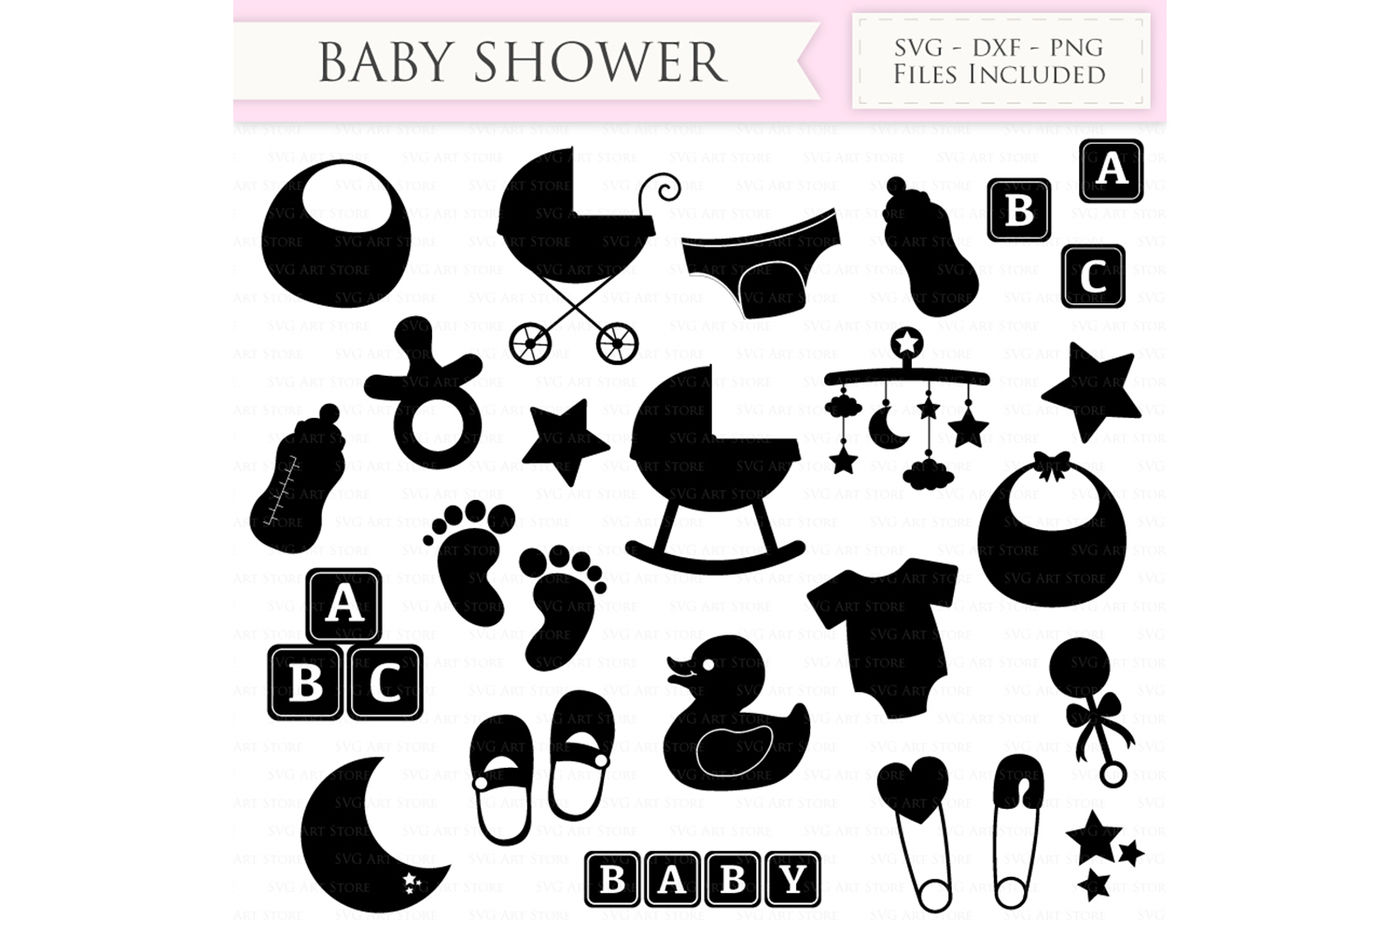 Download Baby Shower Svg Files New Baby Svg Cutting File By Svgartstore Thehungryjpeg Com